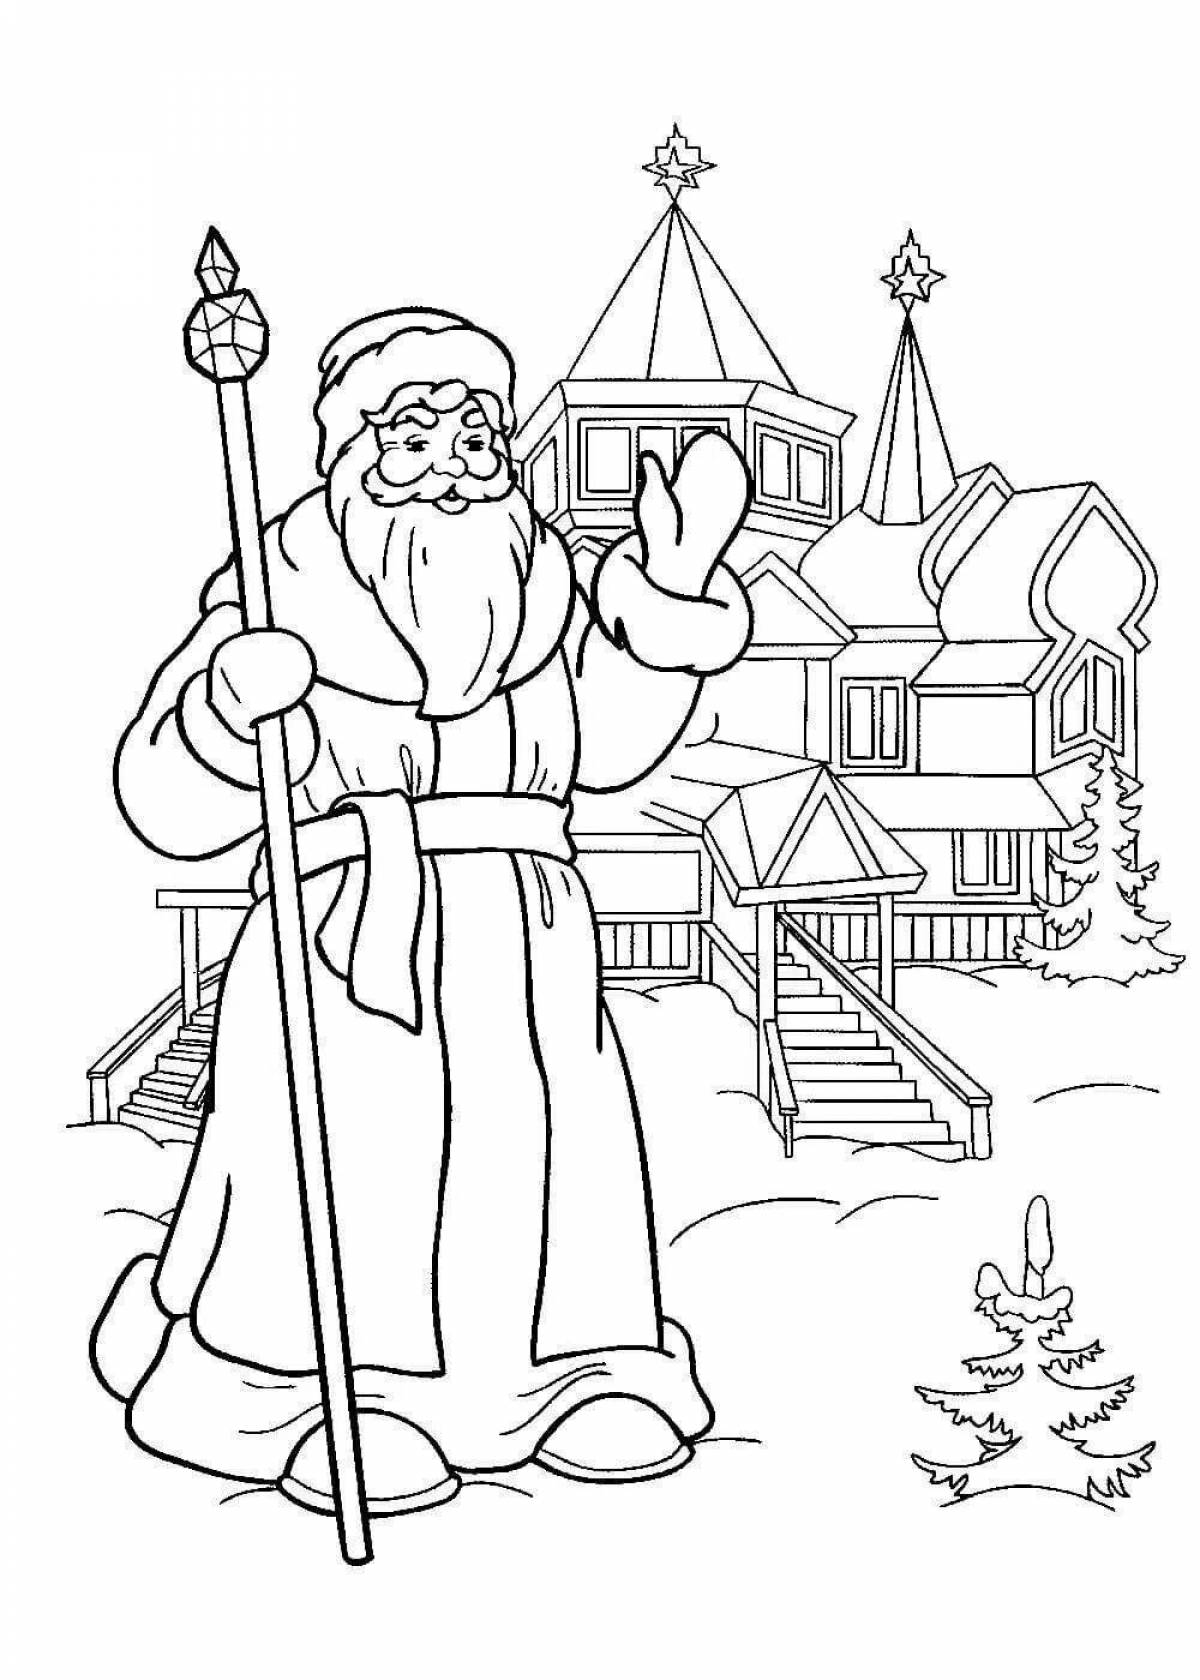 Coloring page festive governor frost